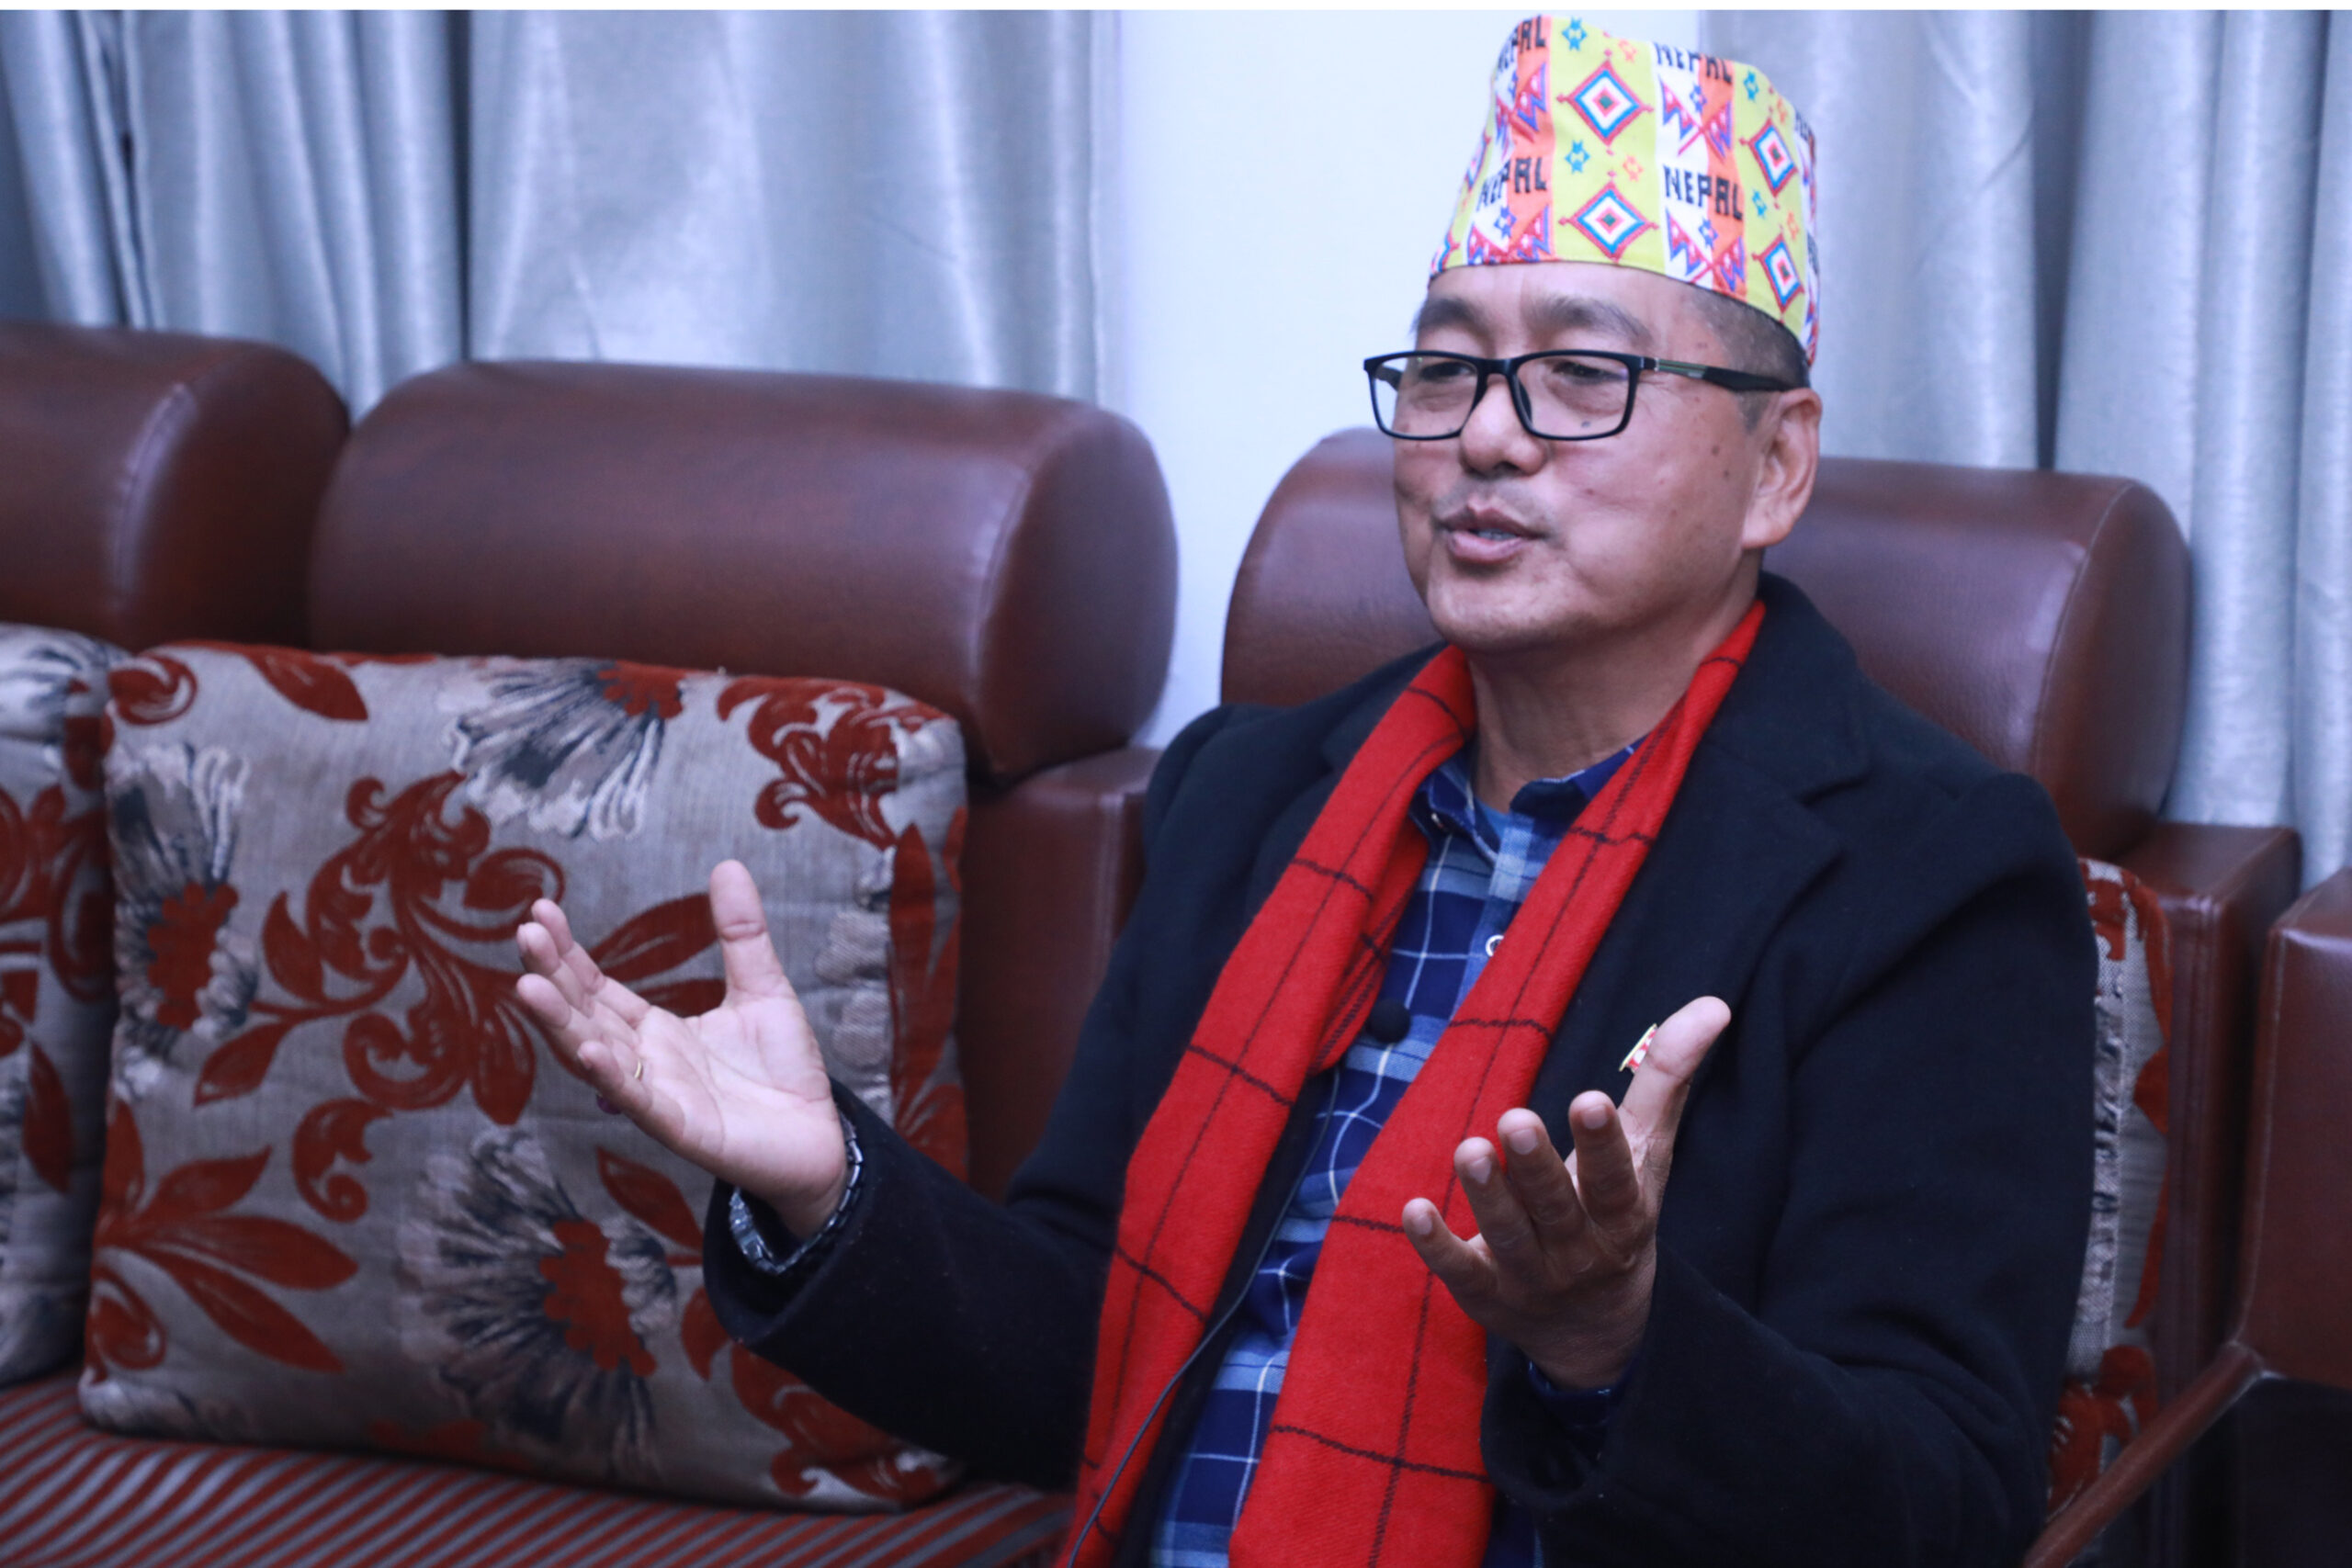 Koshi Speaker related dispute is under discussion in party: RPP Chair Lingden